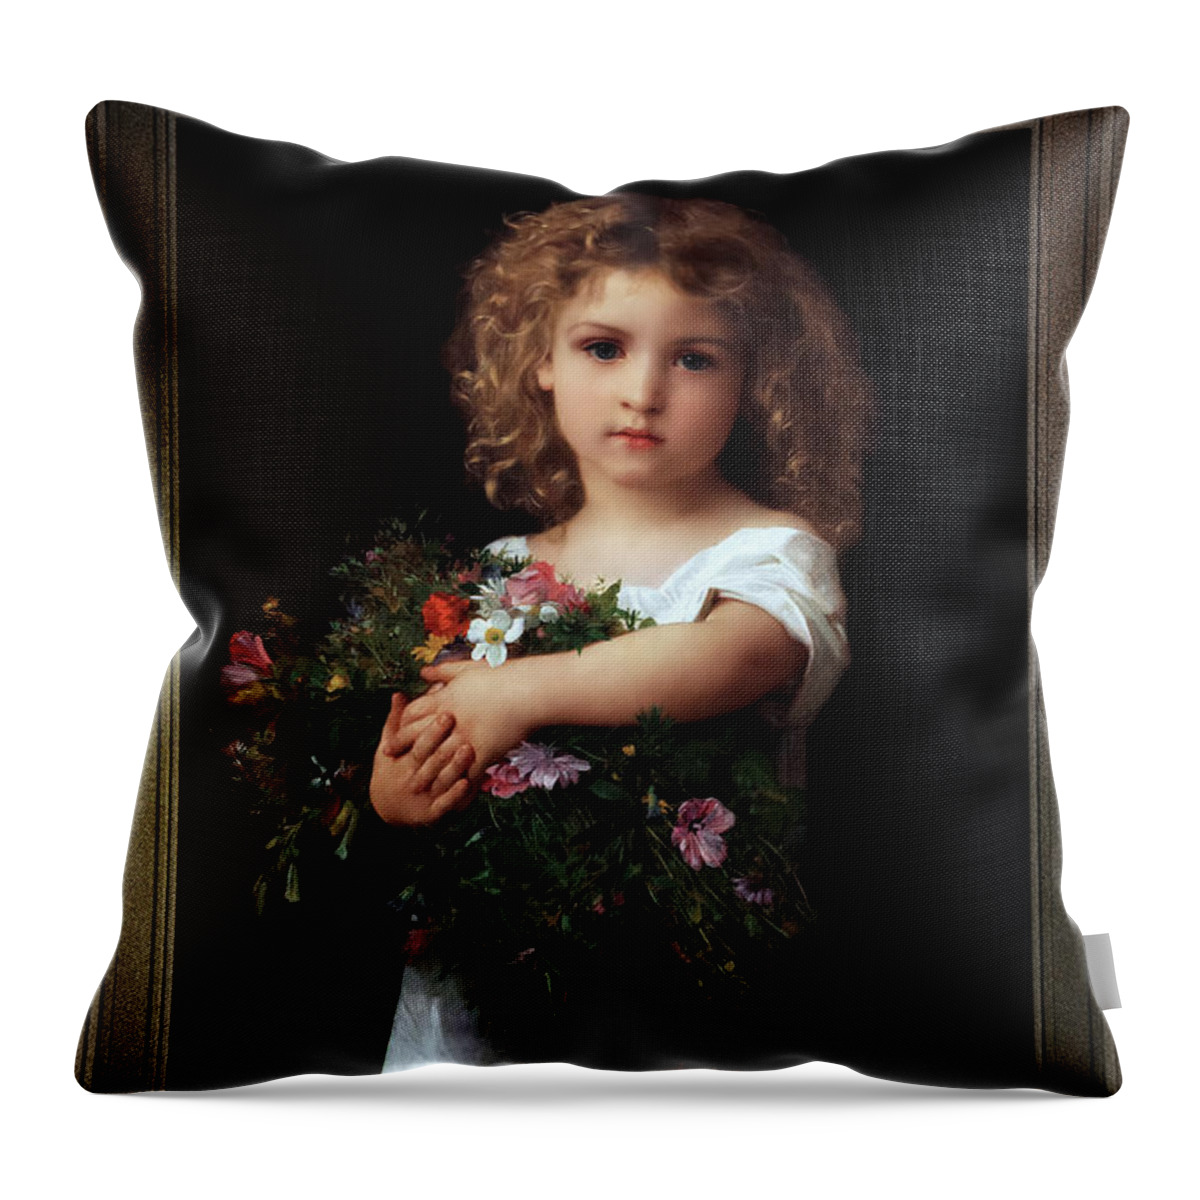 Little Girl With Flowers Throw Pillow featuring the painting Little Girl With Flowers by William-Adolphe Bouguereau by Rolando Burbon